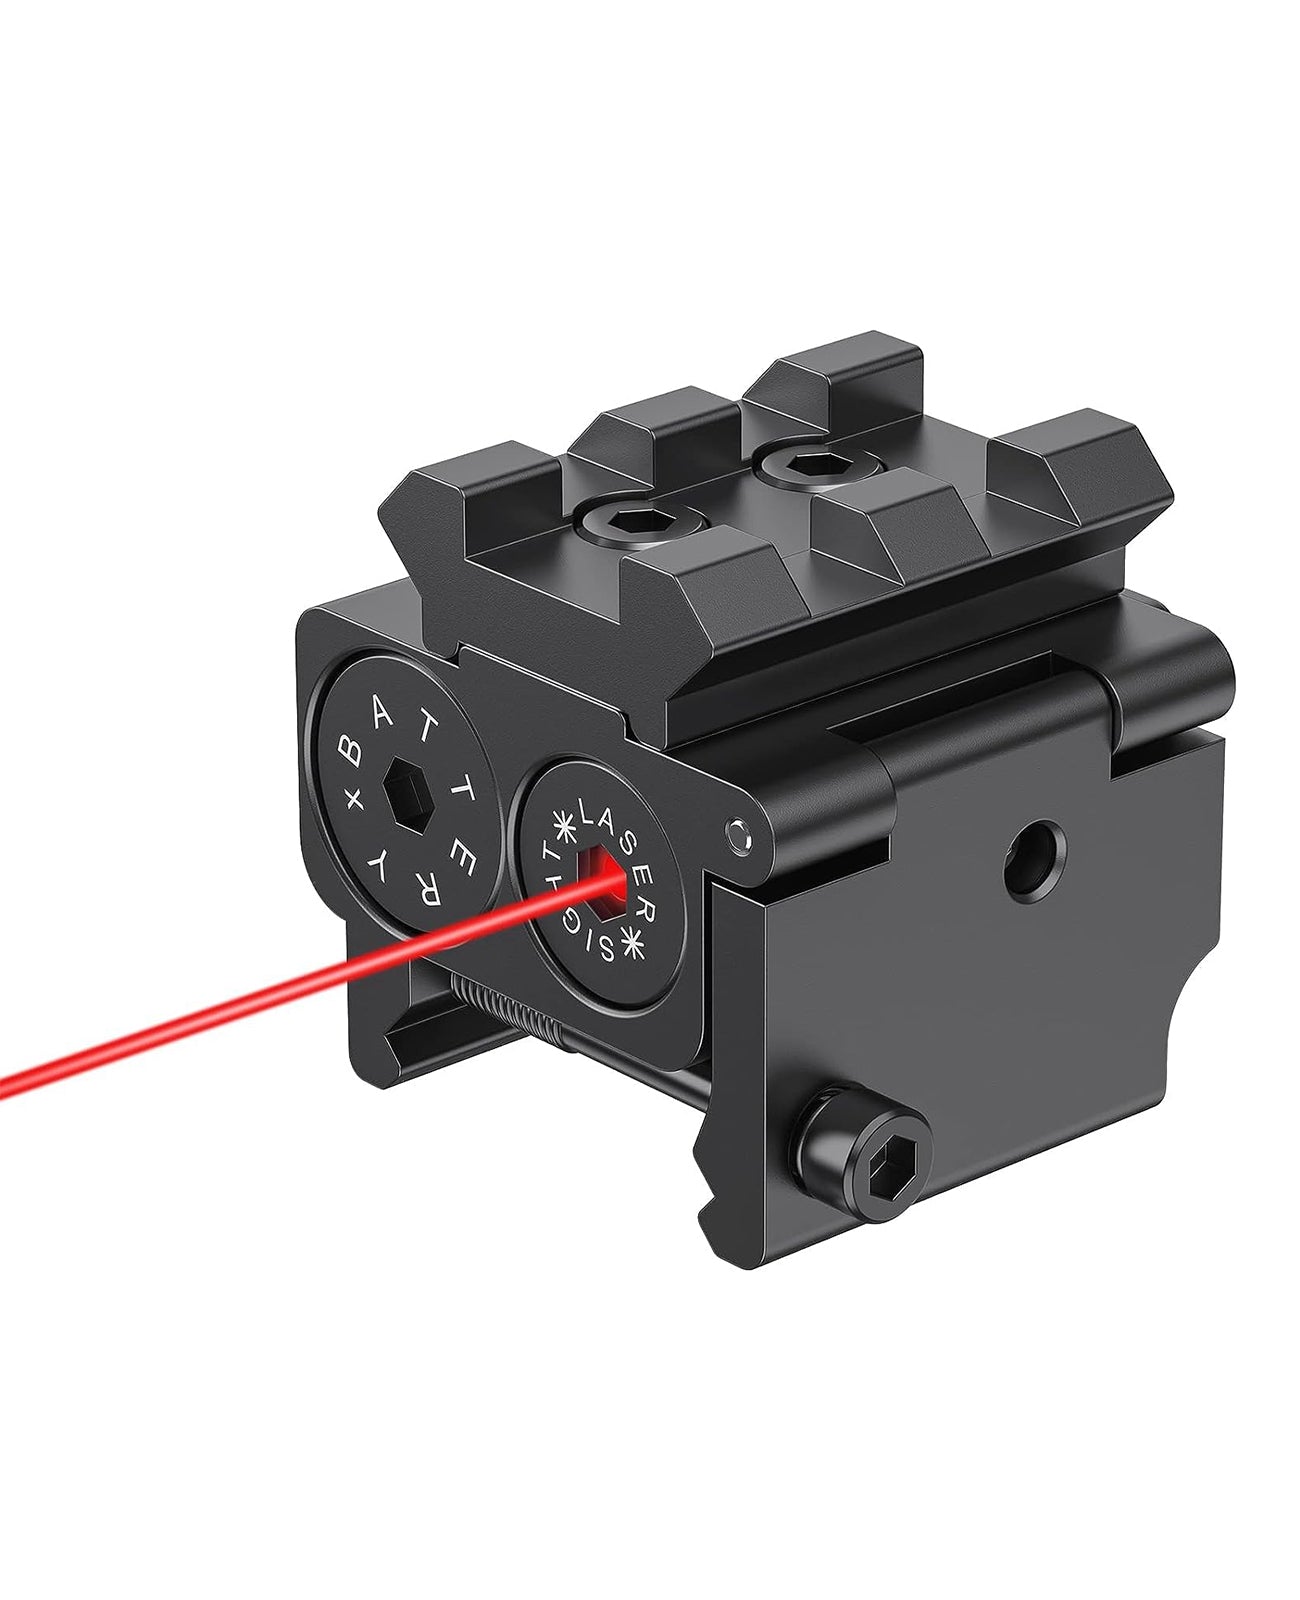 Red Laser Sight for Pistols with Rail Mount